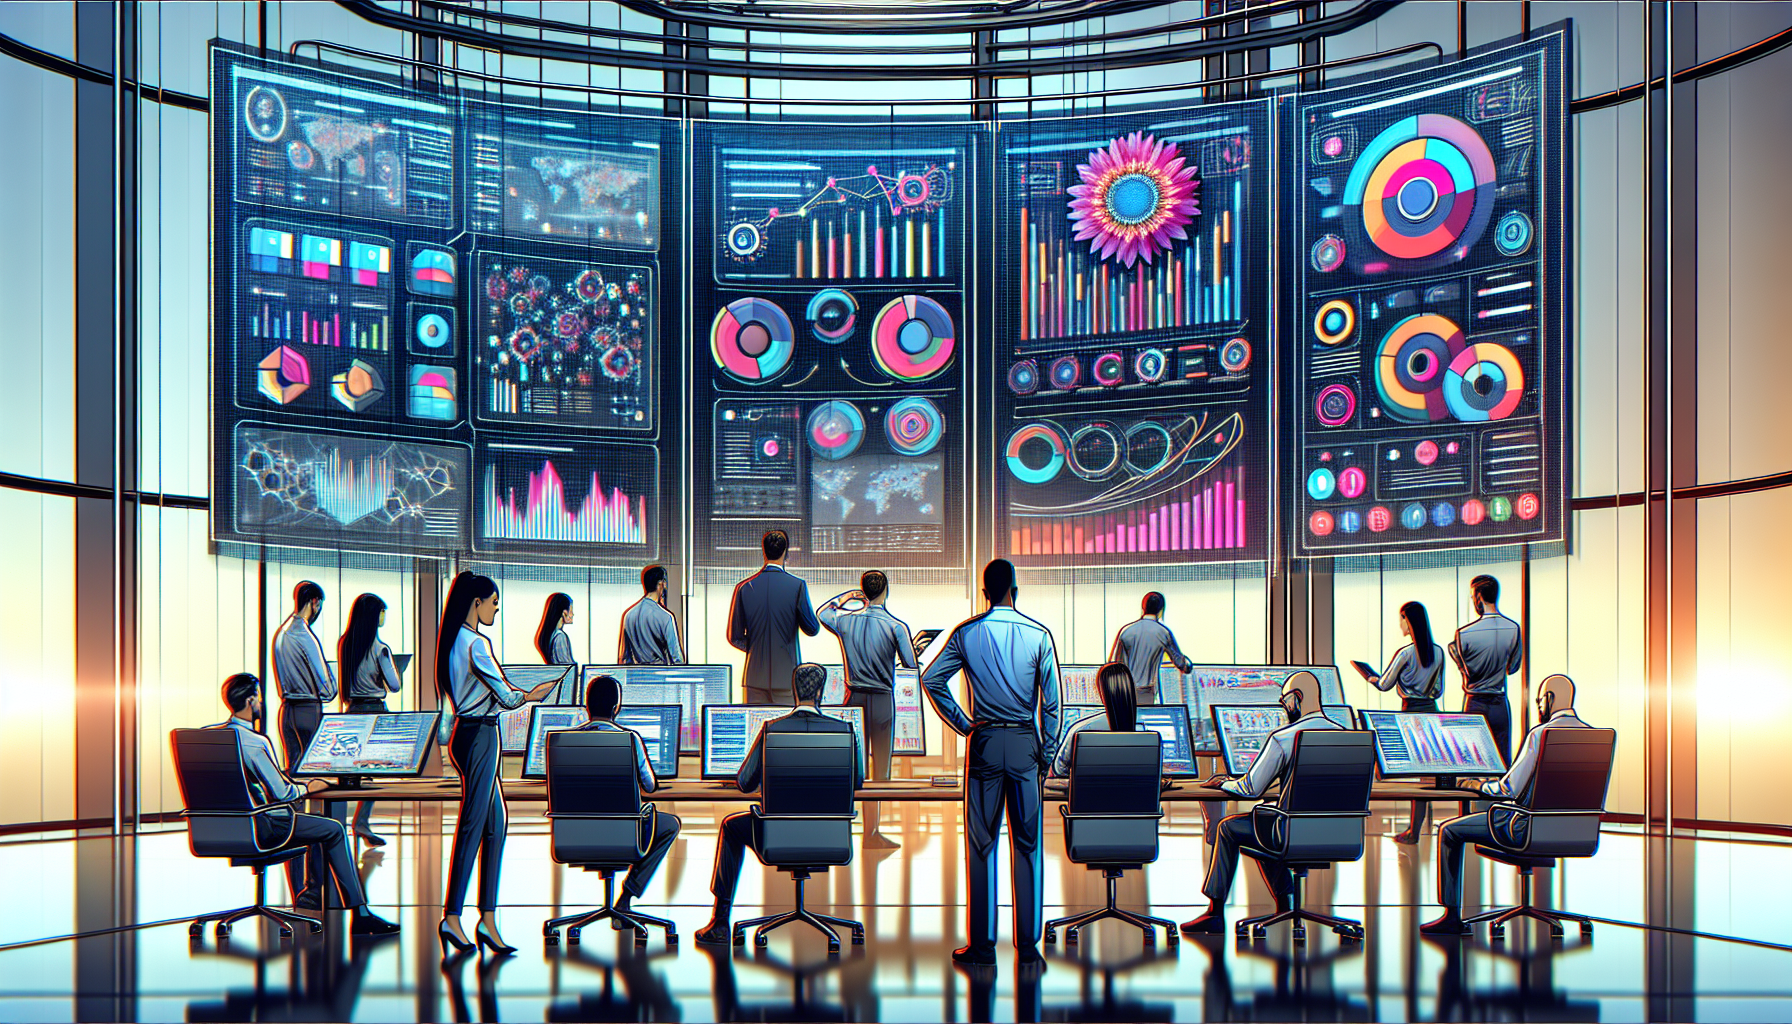 An illustrated scene of a modern office with diverse team members evaluating software on large digital screens, displaying graphs and analytics of missed call management systems. Emphasis on technolog